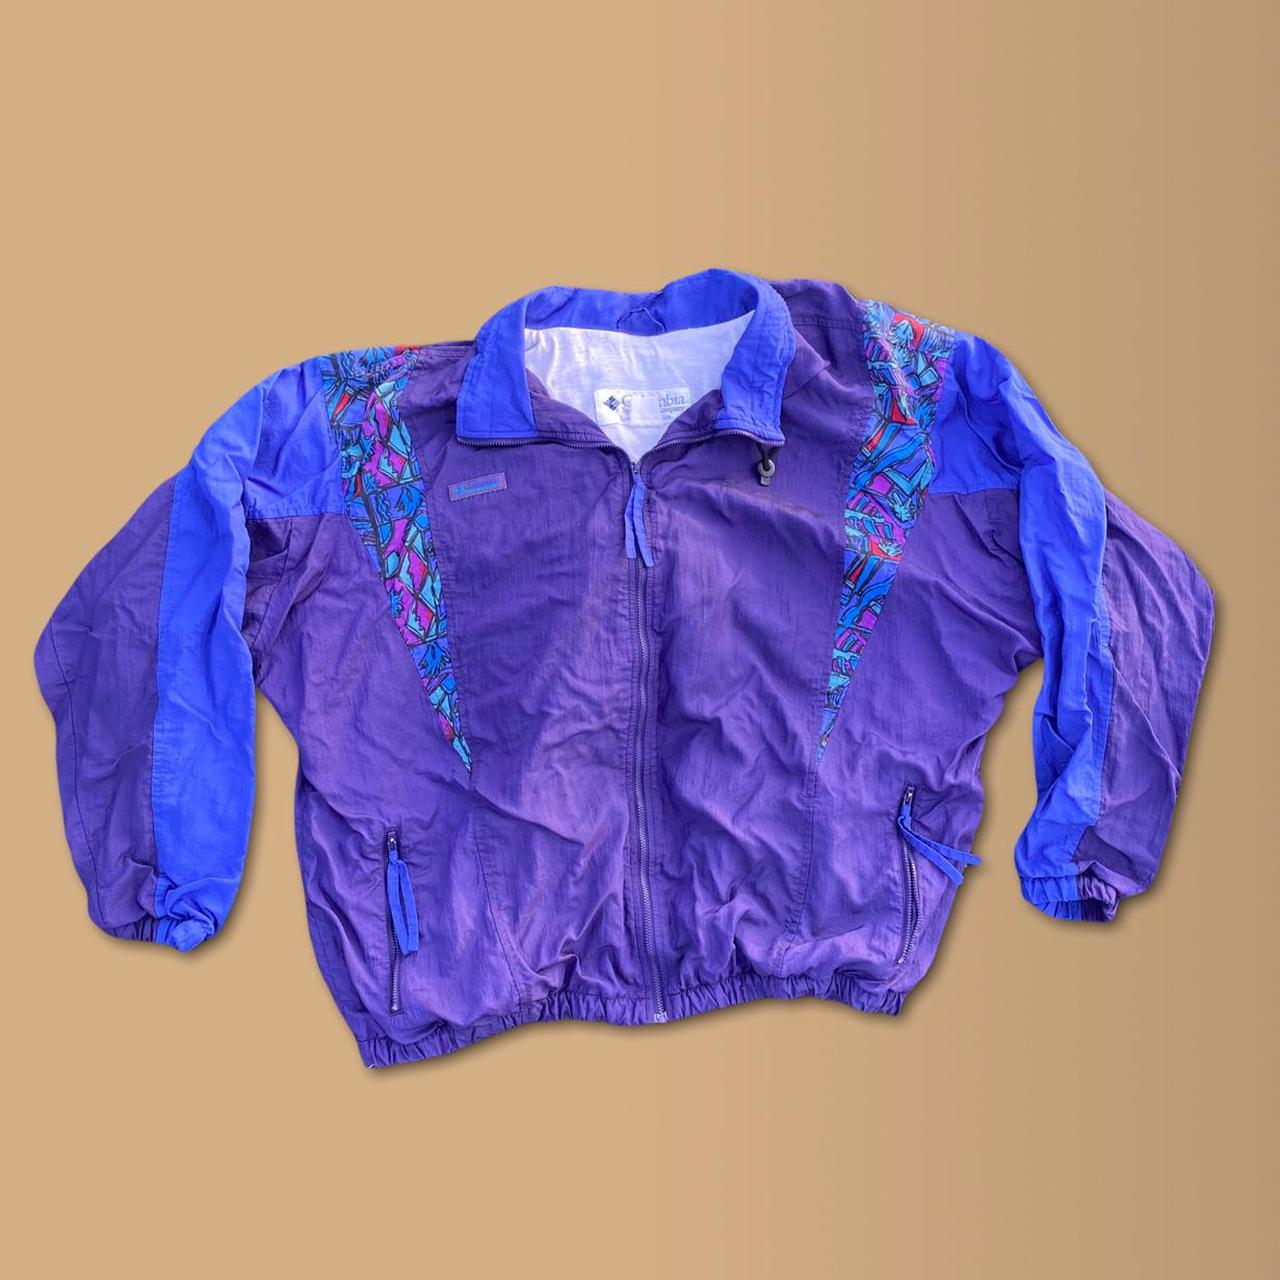 Product Image 1 - Vintage 90s purple and blue